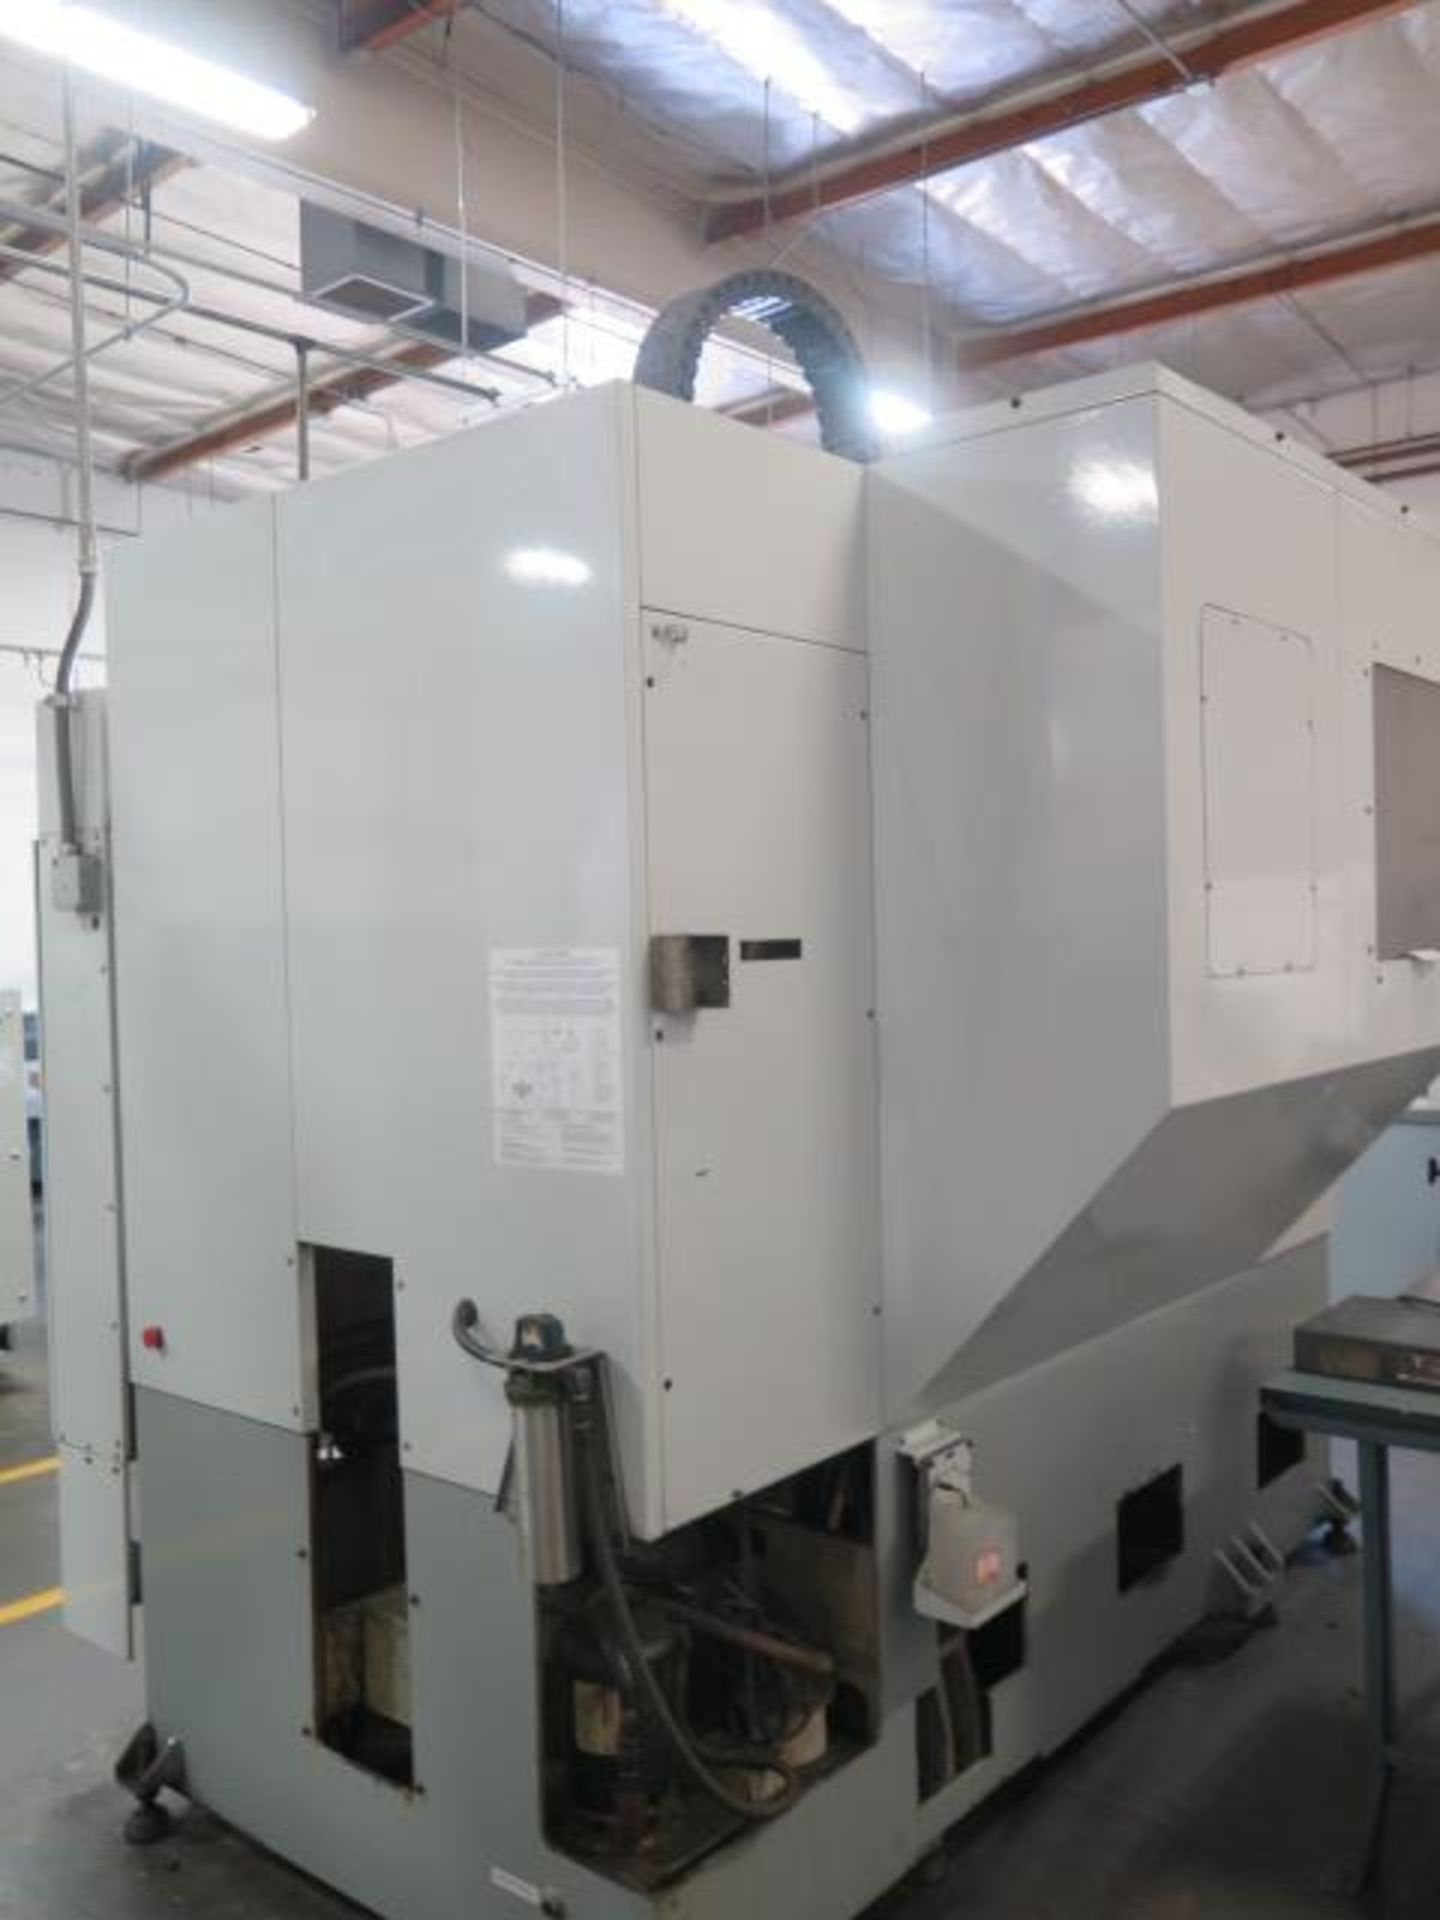 2002 Haas MDC-1 Dual Pallet CNC Milling Center s/n 29420 (Pallet Changer Needs Repair), SOLD AS IS - Image 5 of 16